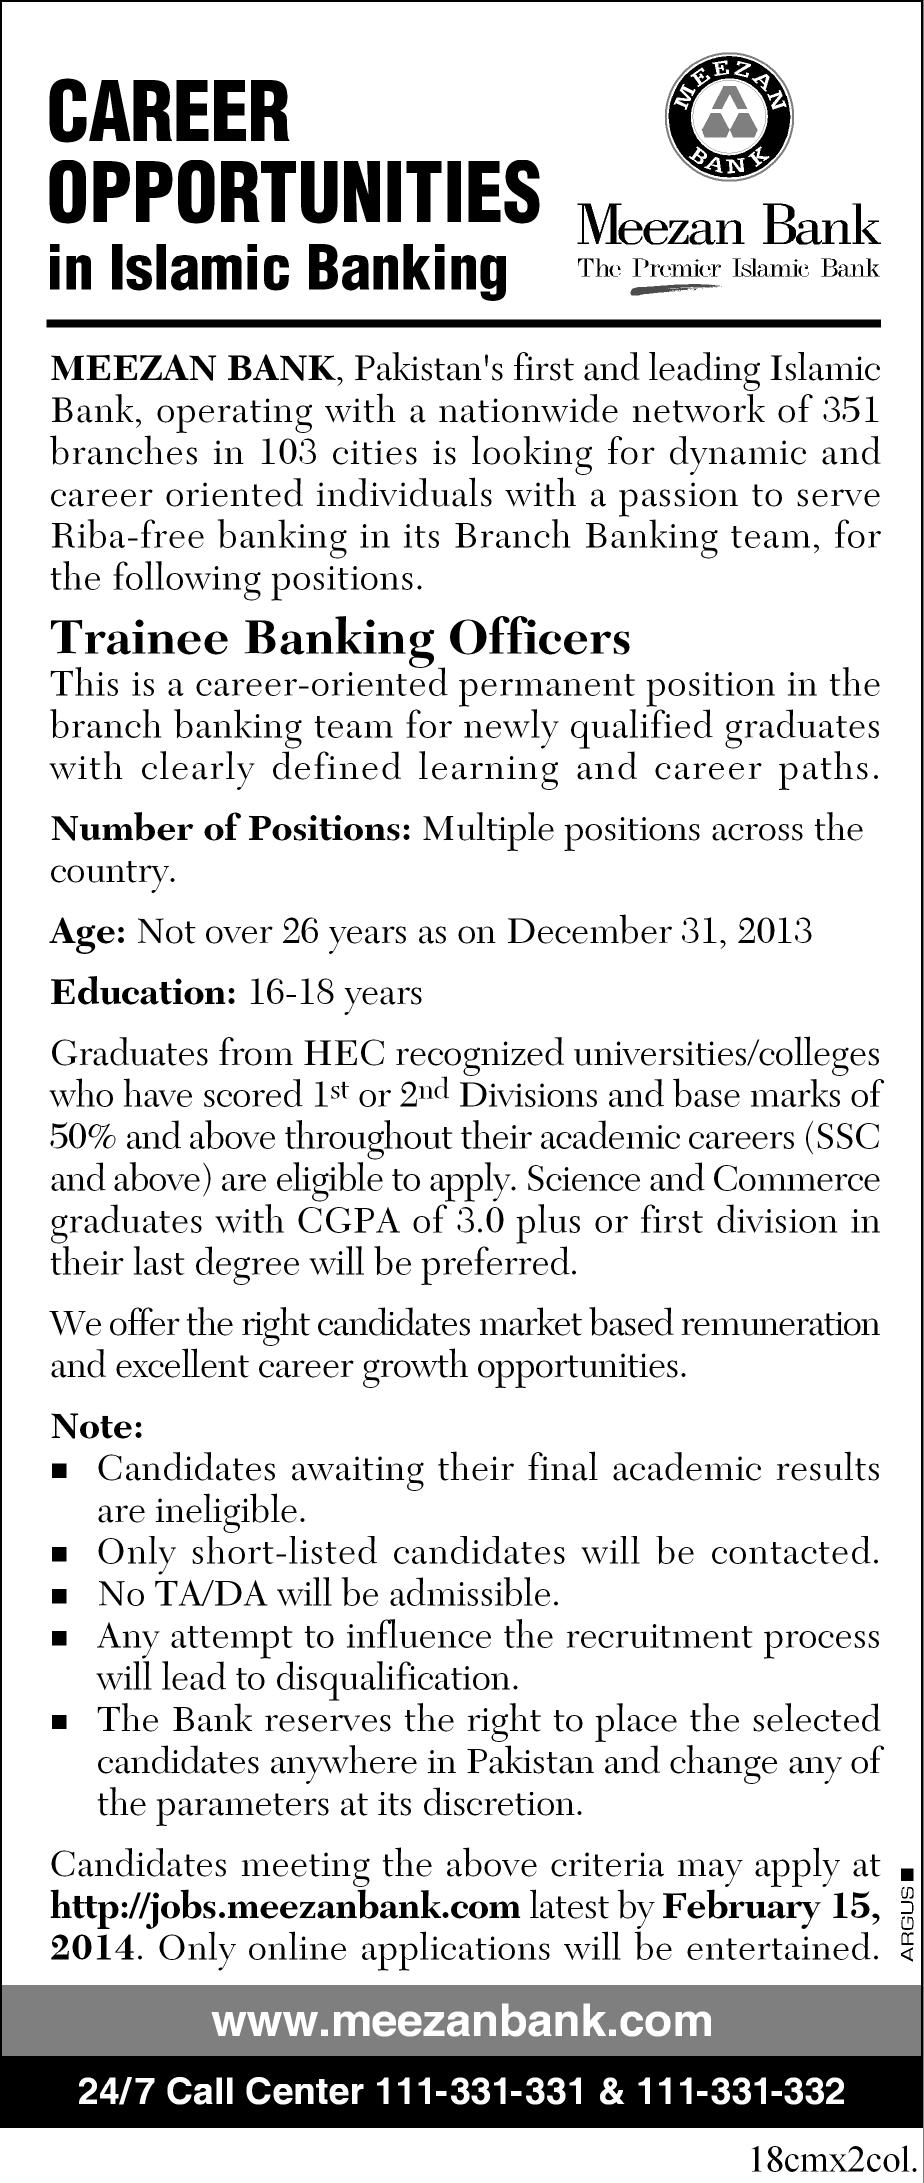 Career Opportunities-Trainee Banking Officers 2014